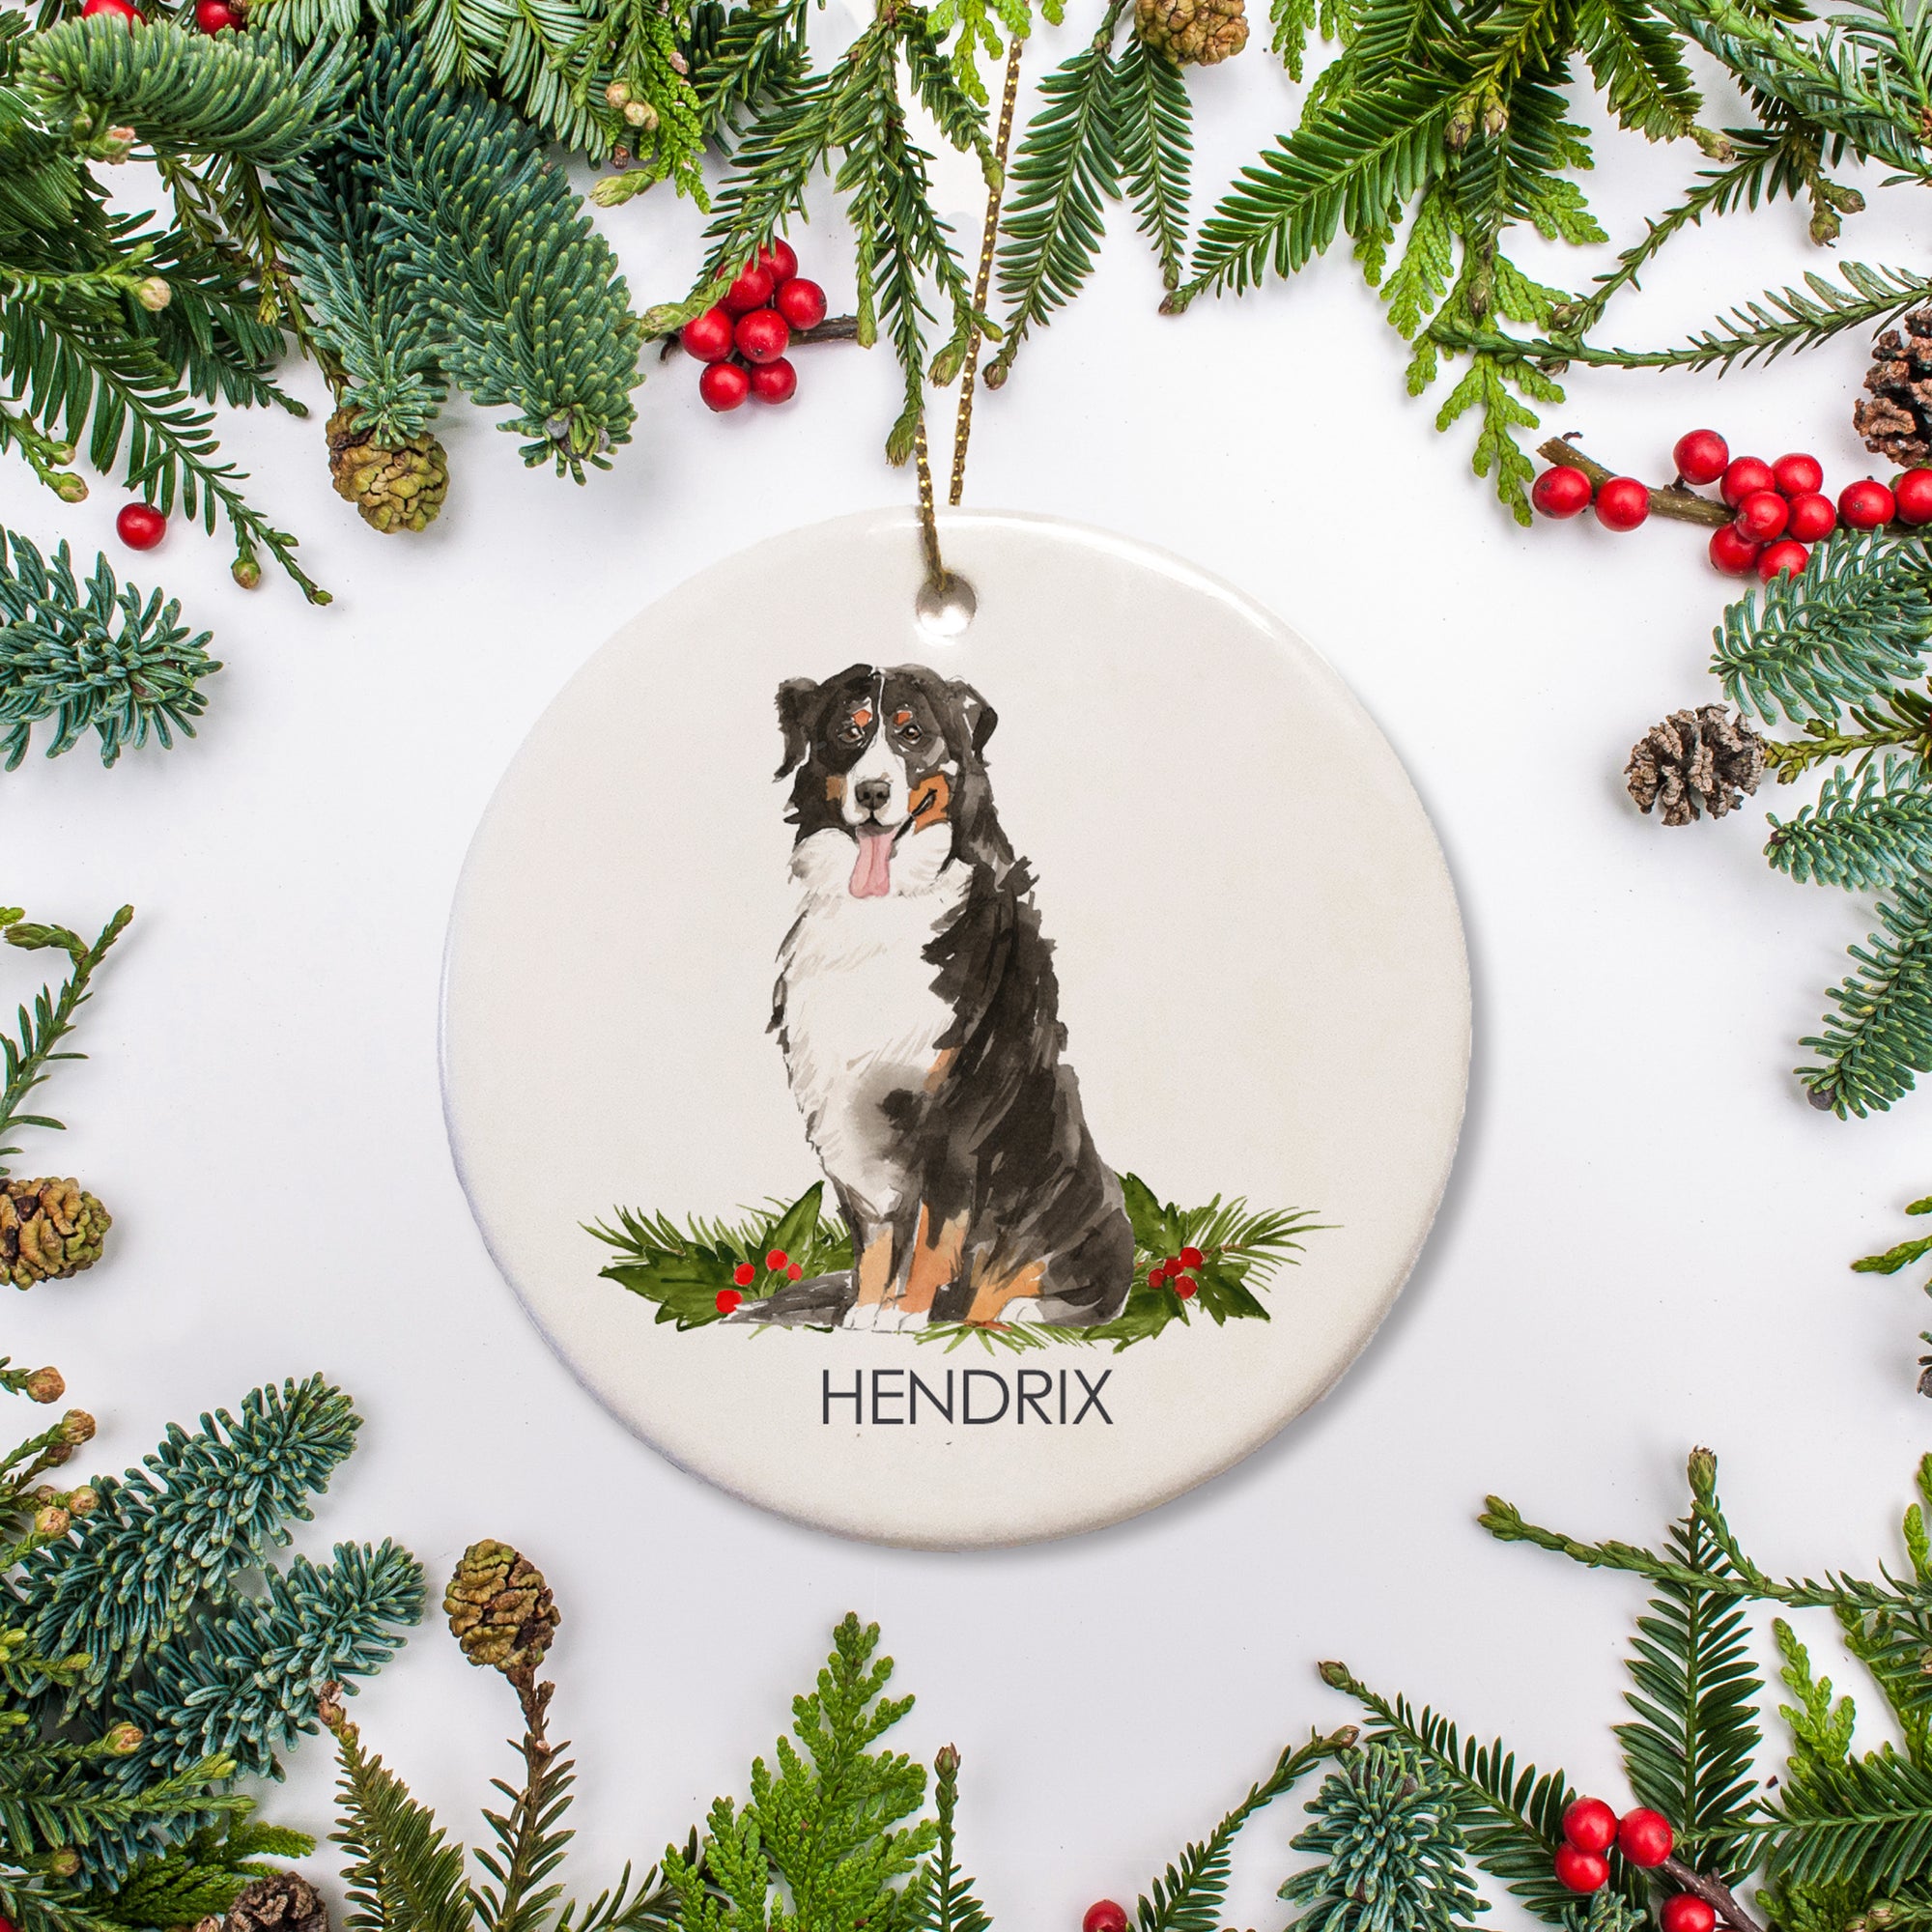 This Christmas ornament bears an image of a Bernese mountain dog and is personalized with your dog's name. Perfect gift for animal buffs or a special remembrance of your pet's holiday season.